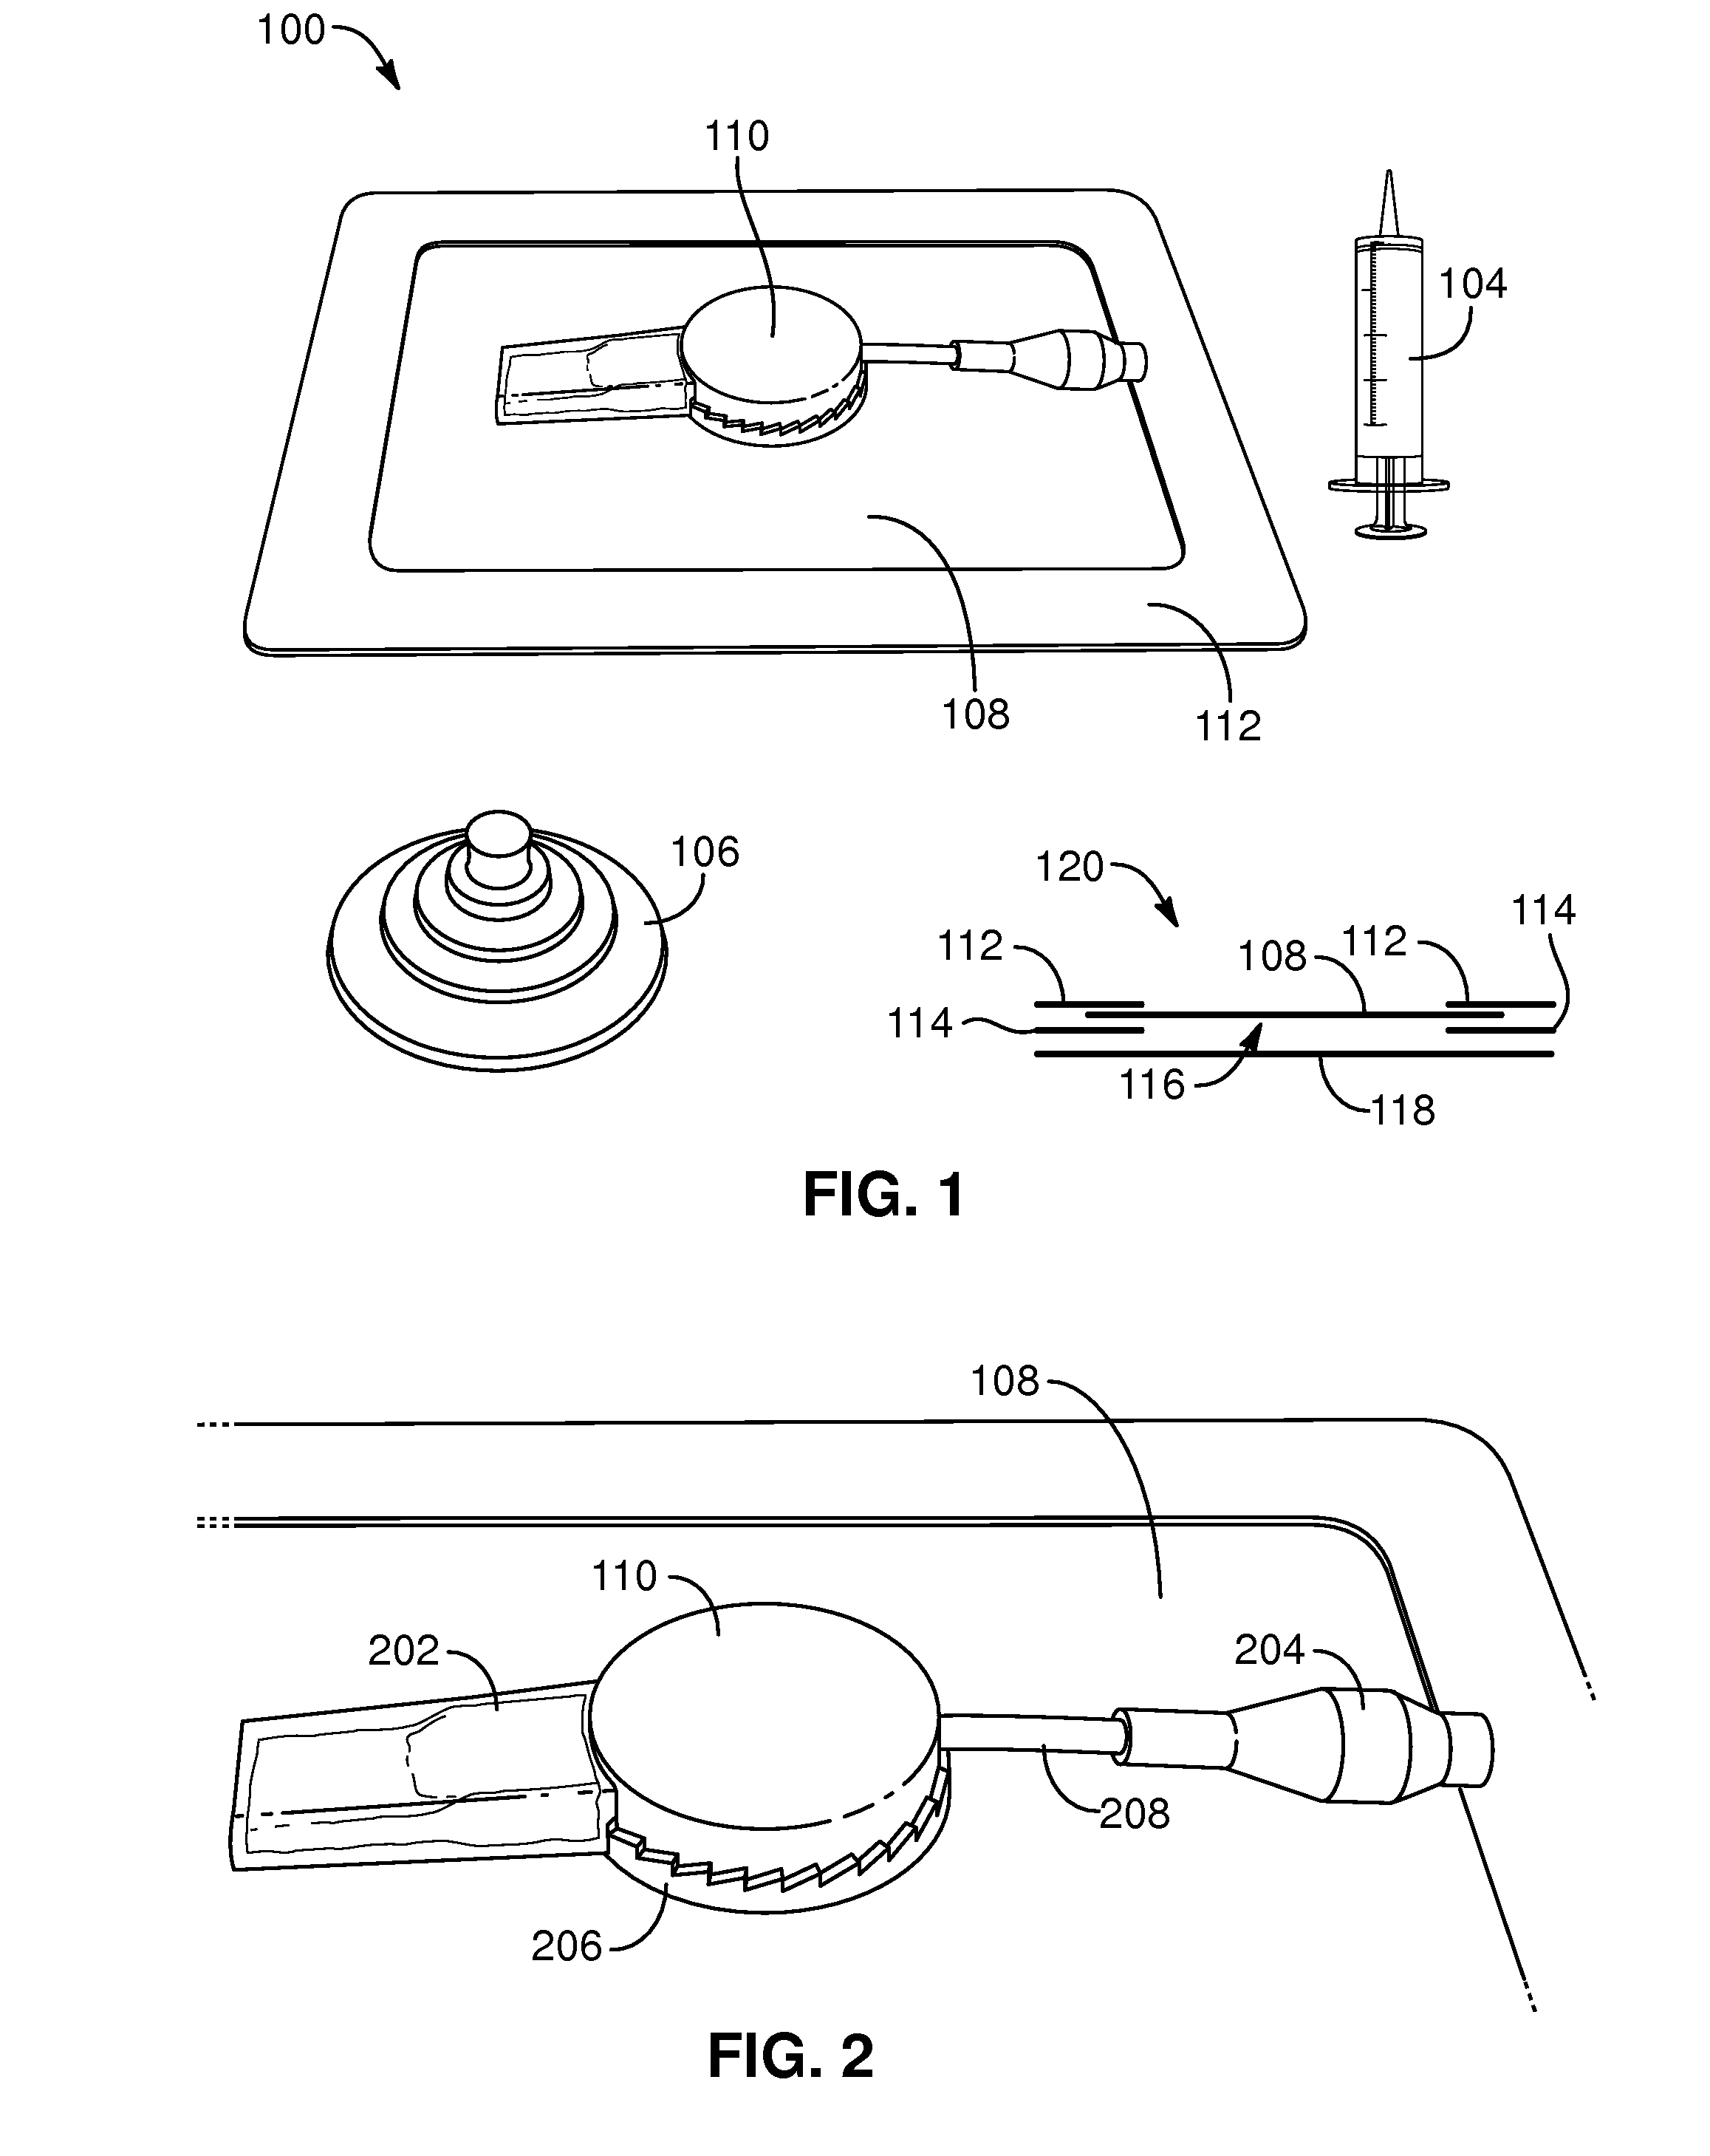 Apparatus, system, and method for protecting and treating a traumatic wound